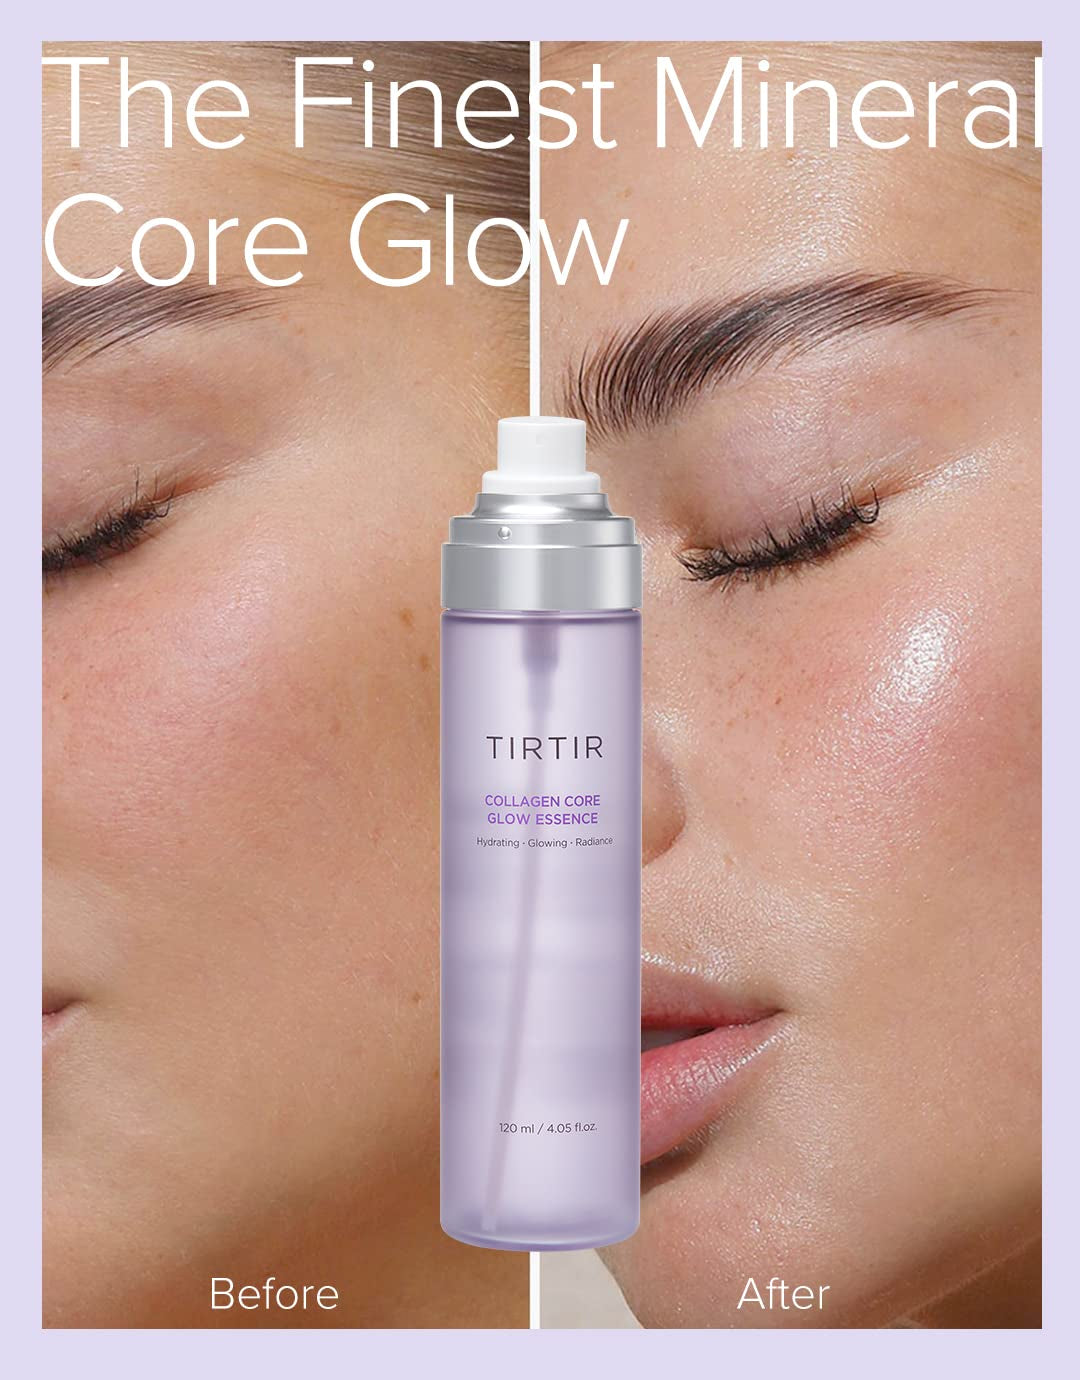 "Ultimate Hydration and Firming Mist - TIRTIR Collagen Core Glow Essence with Collagen & Hyaluronic Acid - Reveal Your Radiant Glow, 3.38 Fl.Oz."